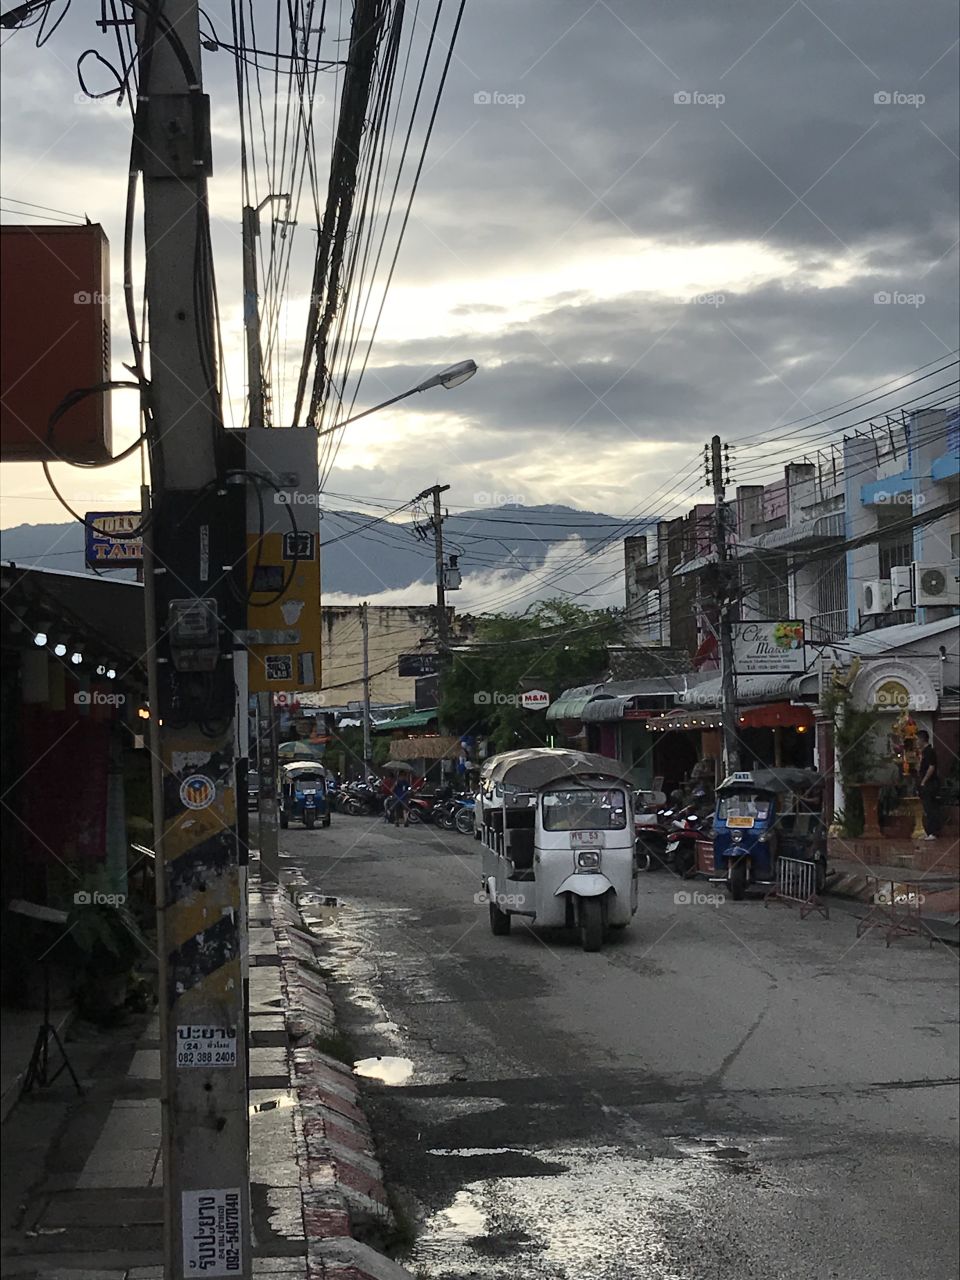 Late afternoon, Chiang Mai, Thailand. The sun sets over the mountains. Storms are coming. A tuk-tuk droves down a street. The famous Asian telephone lines cover the sky. 